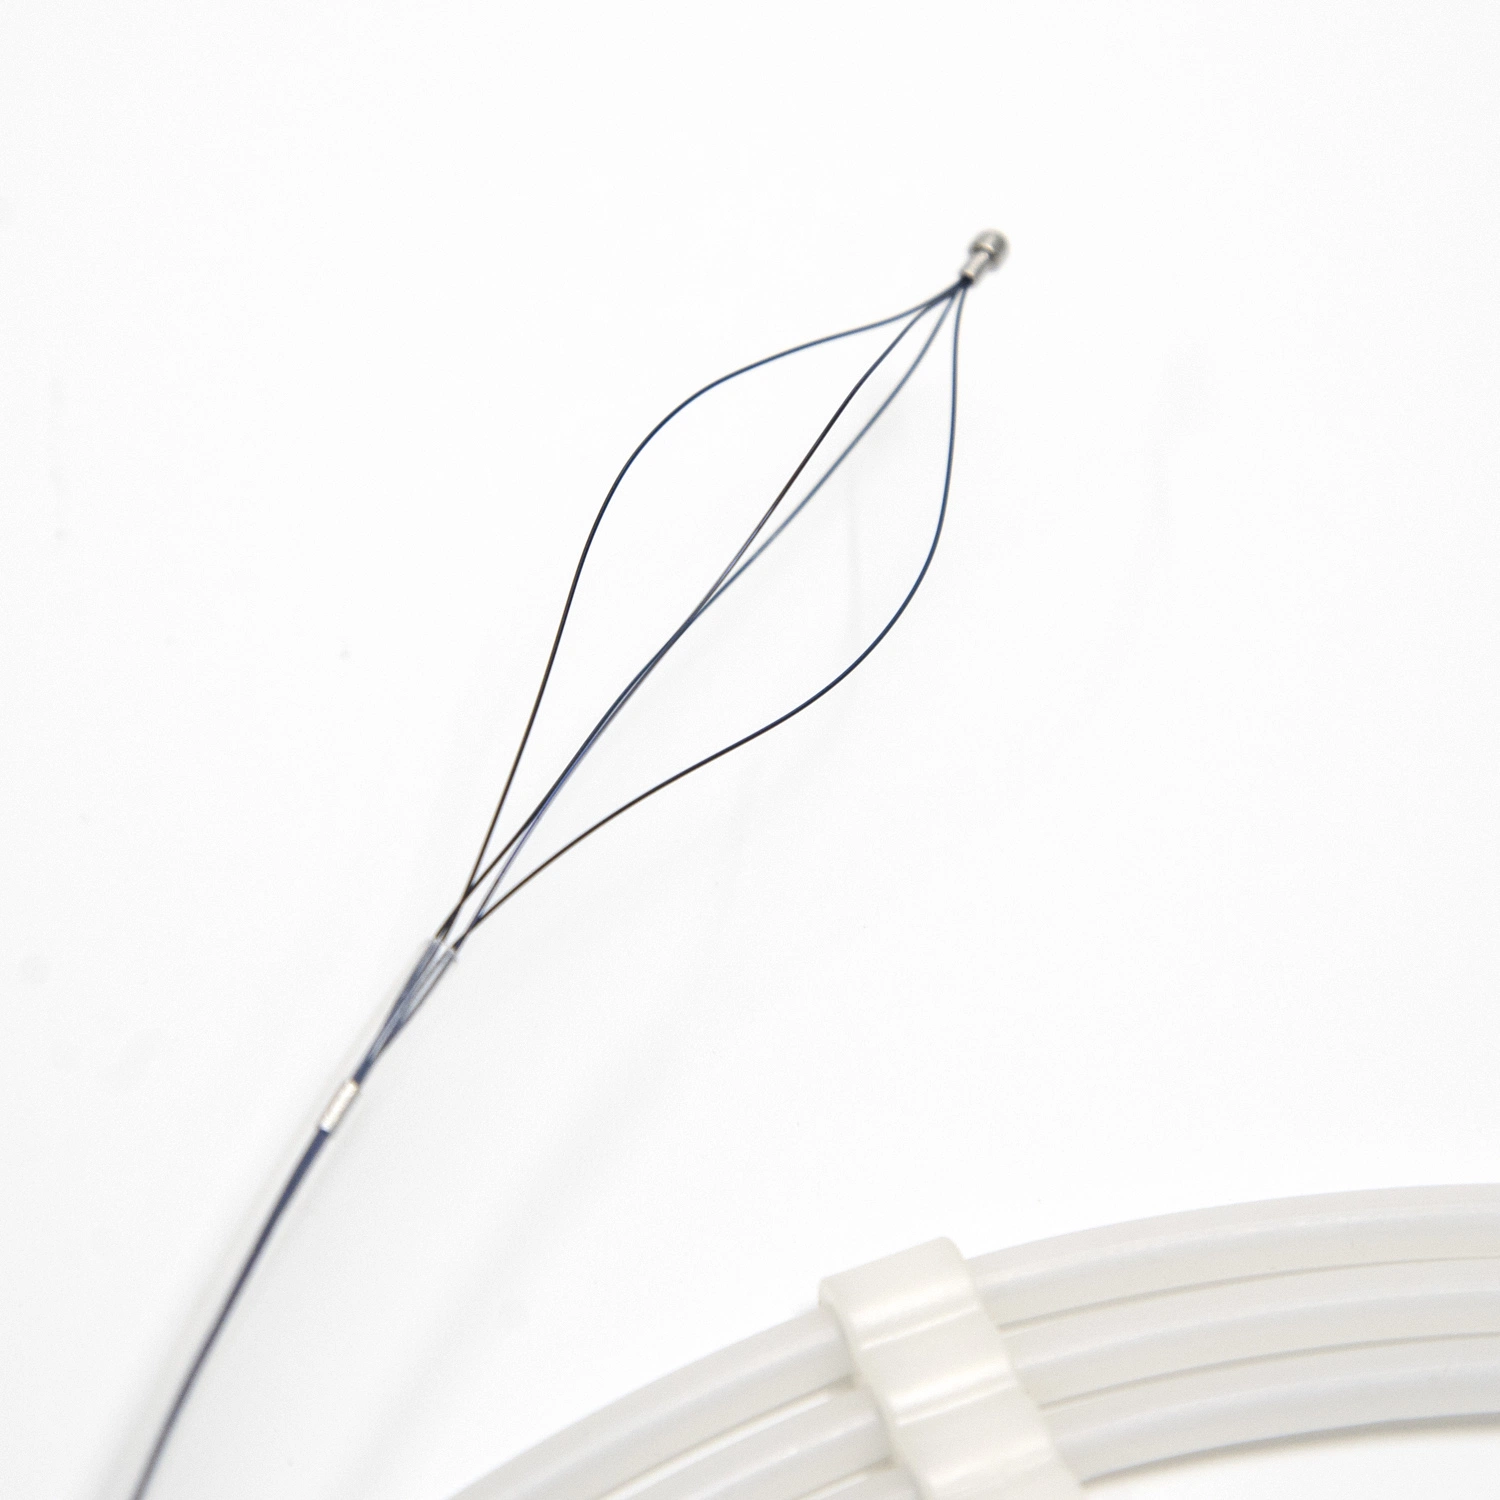 2.3mm Od 2100mm Length 20mm Nitinol Stone Extraction Foreign Body Basket